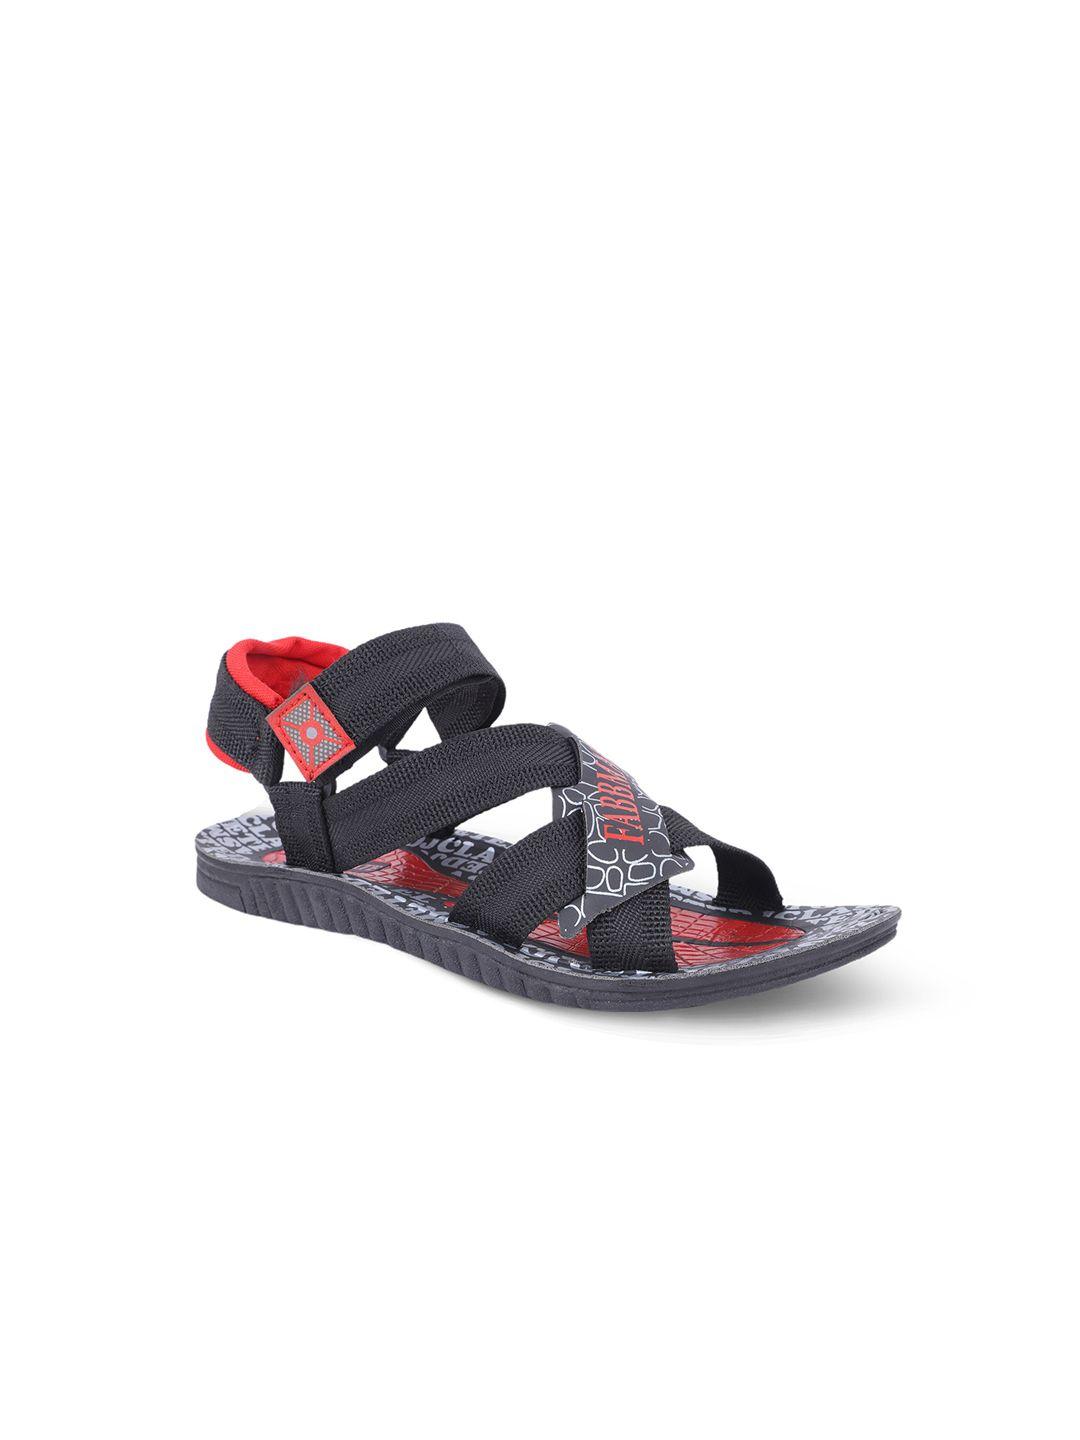 fabbmate men black & red sports sandals